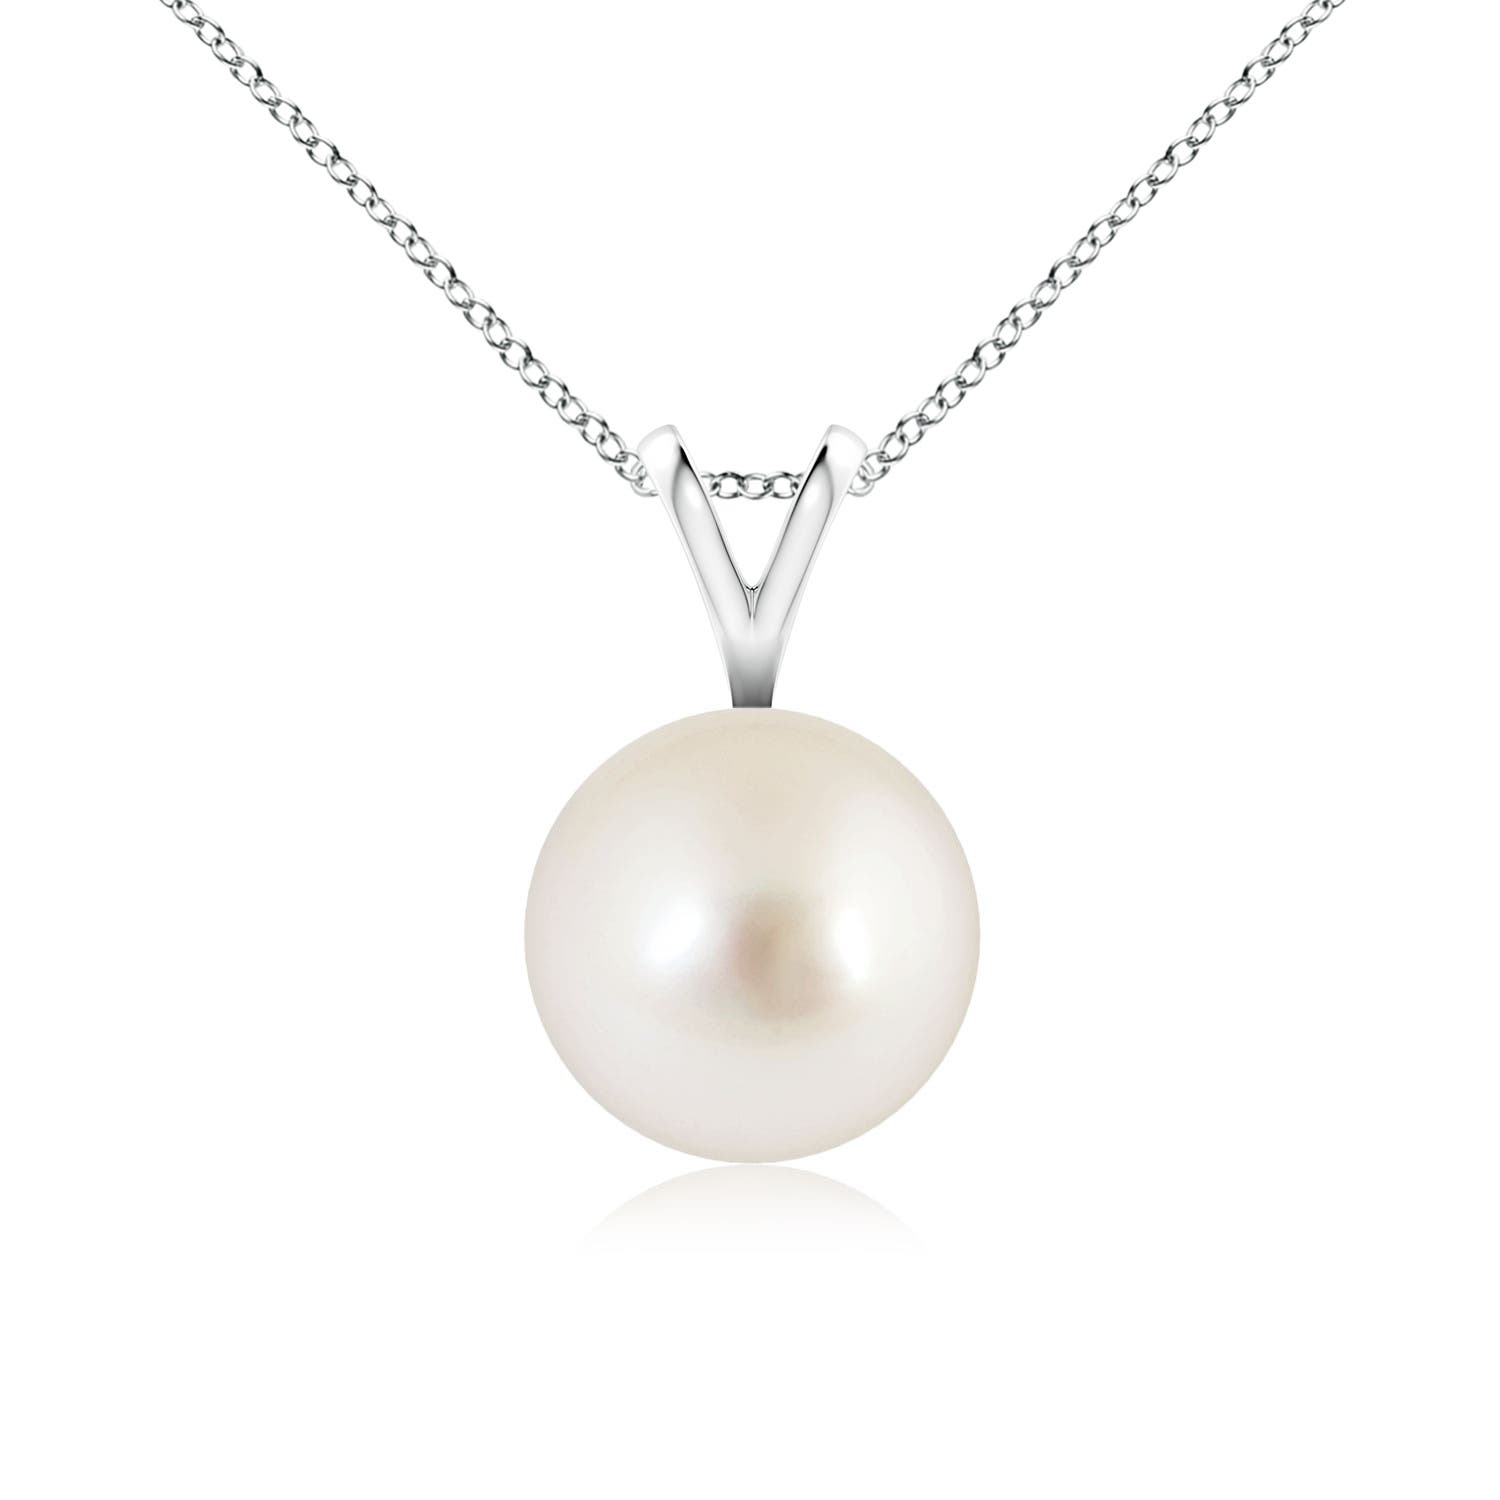 AAAA - South Sea Cultured Pearl / 3.7 CT / 14 KT White Gold